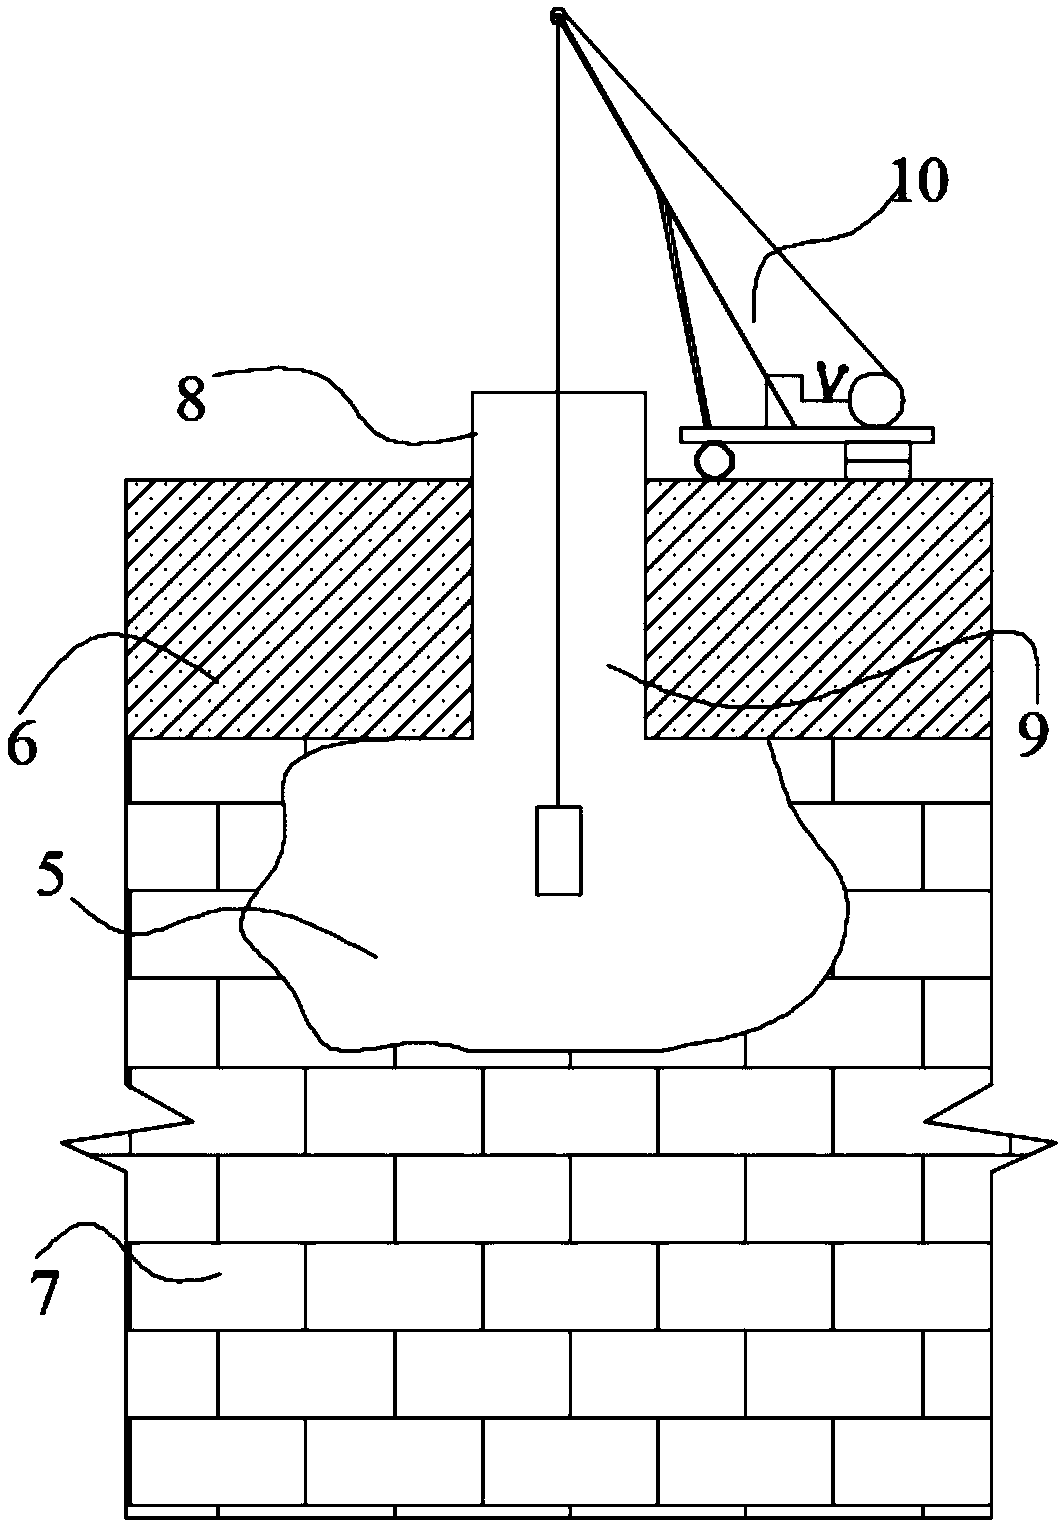 Pile foundation construction method capable of three-dimensional expansion